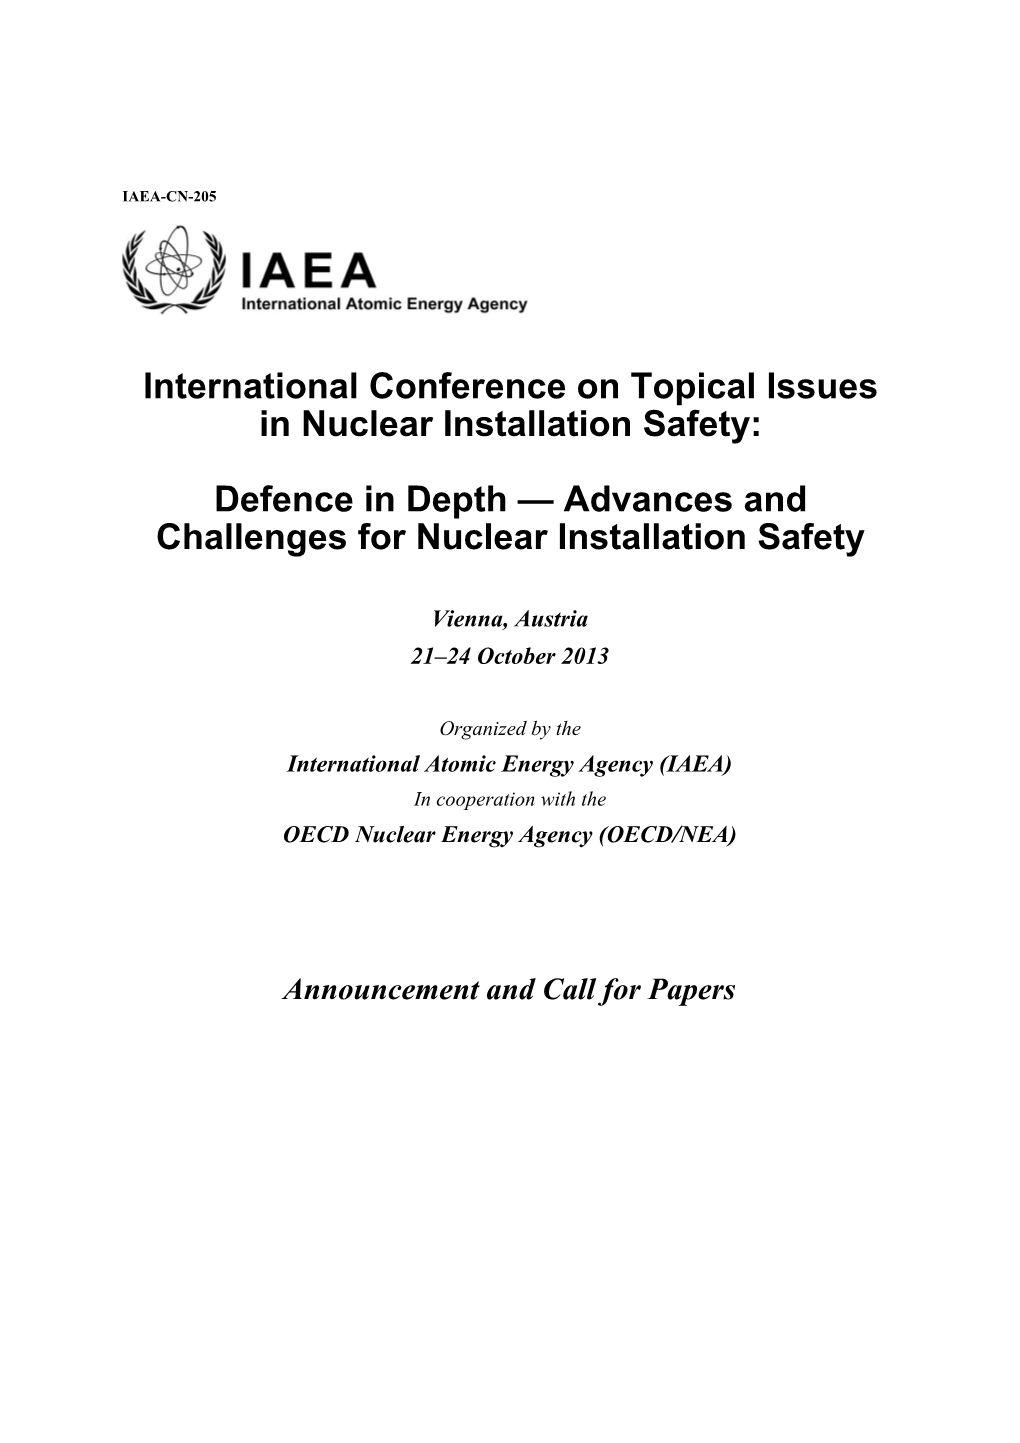 International Conference on Topical Issuesin Nuclear Installation Safety